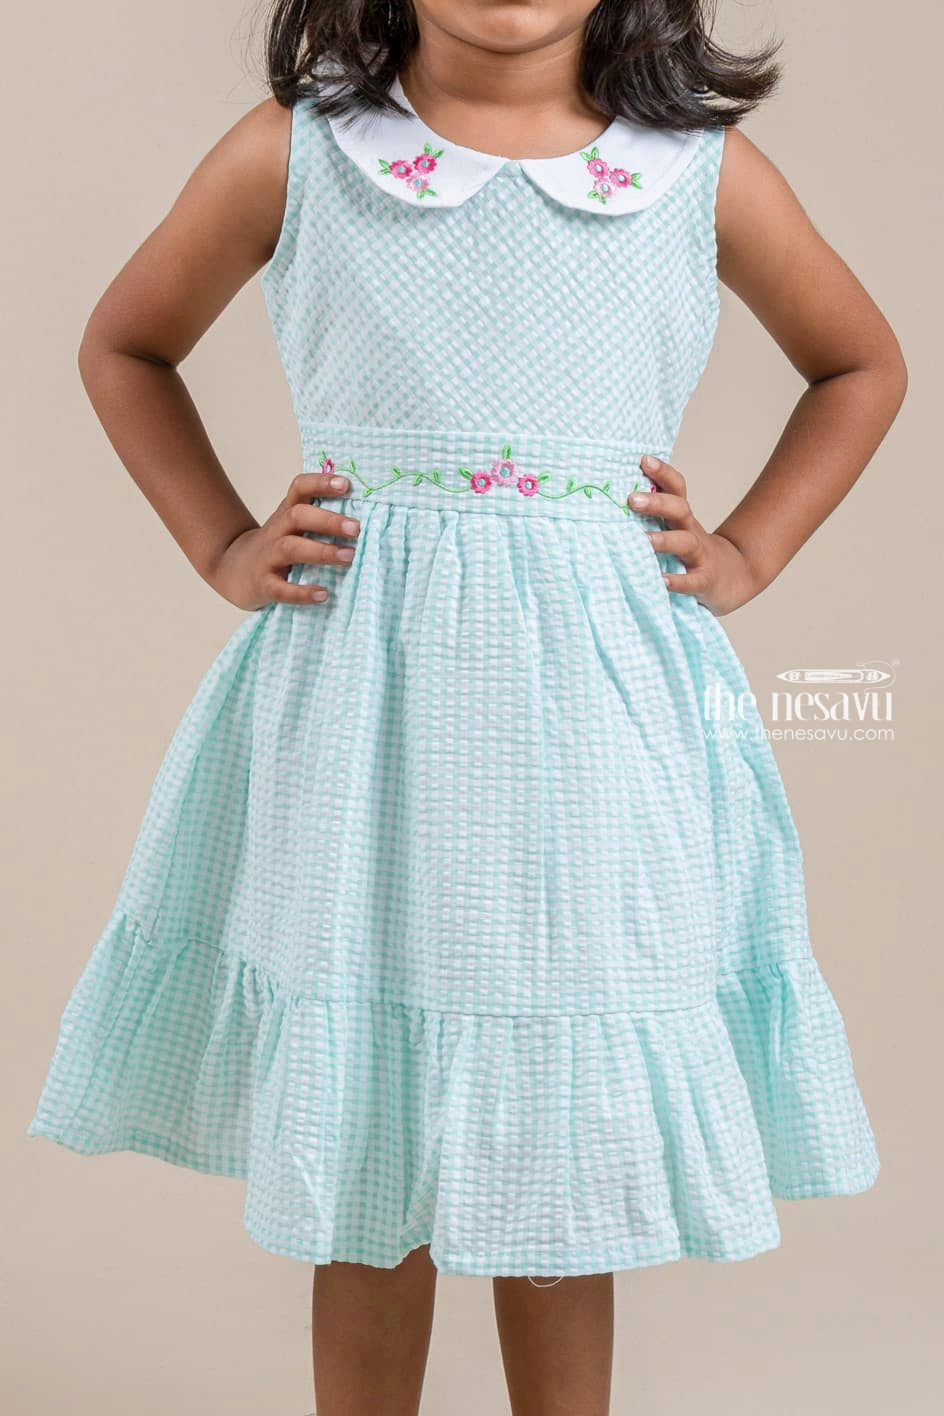 The Nesavu Girls Cotton Frock Cute Peter Pan Collared Chekered Pattern Turquoise Girls Frock With Floral Embroidered Design Nesavu Girls Cotton Frock Online | Casual Wear For Girls | The Nesavu